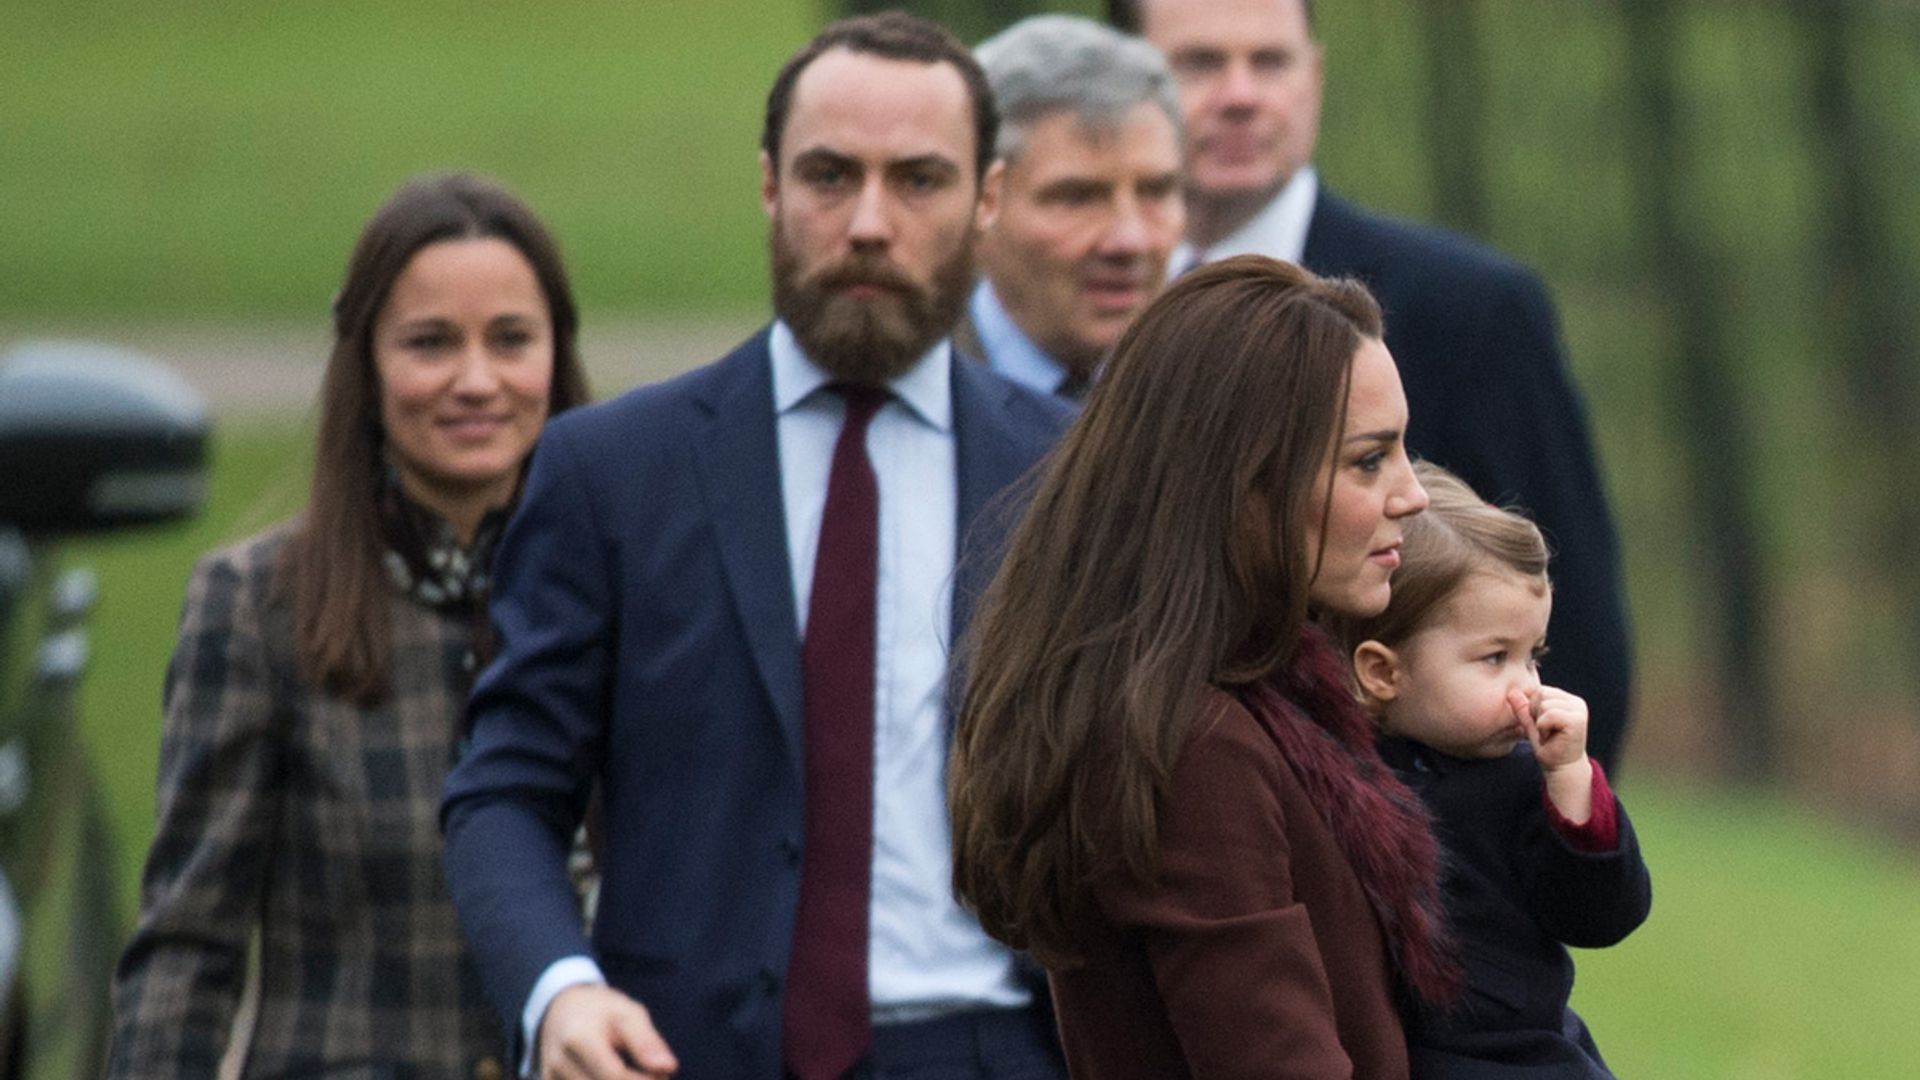 James Middleton breaks silence as sister Kate Middleton is named new Princess of Wales | HELLO!